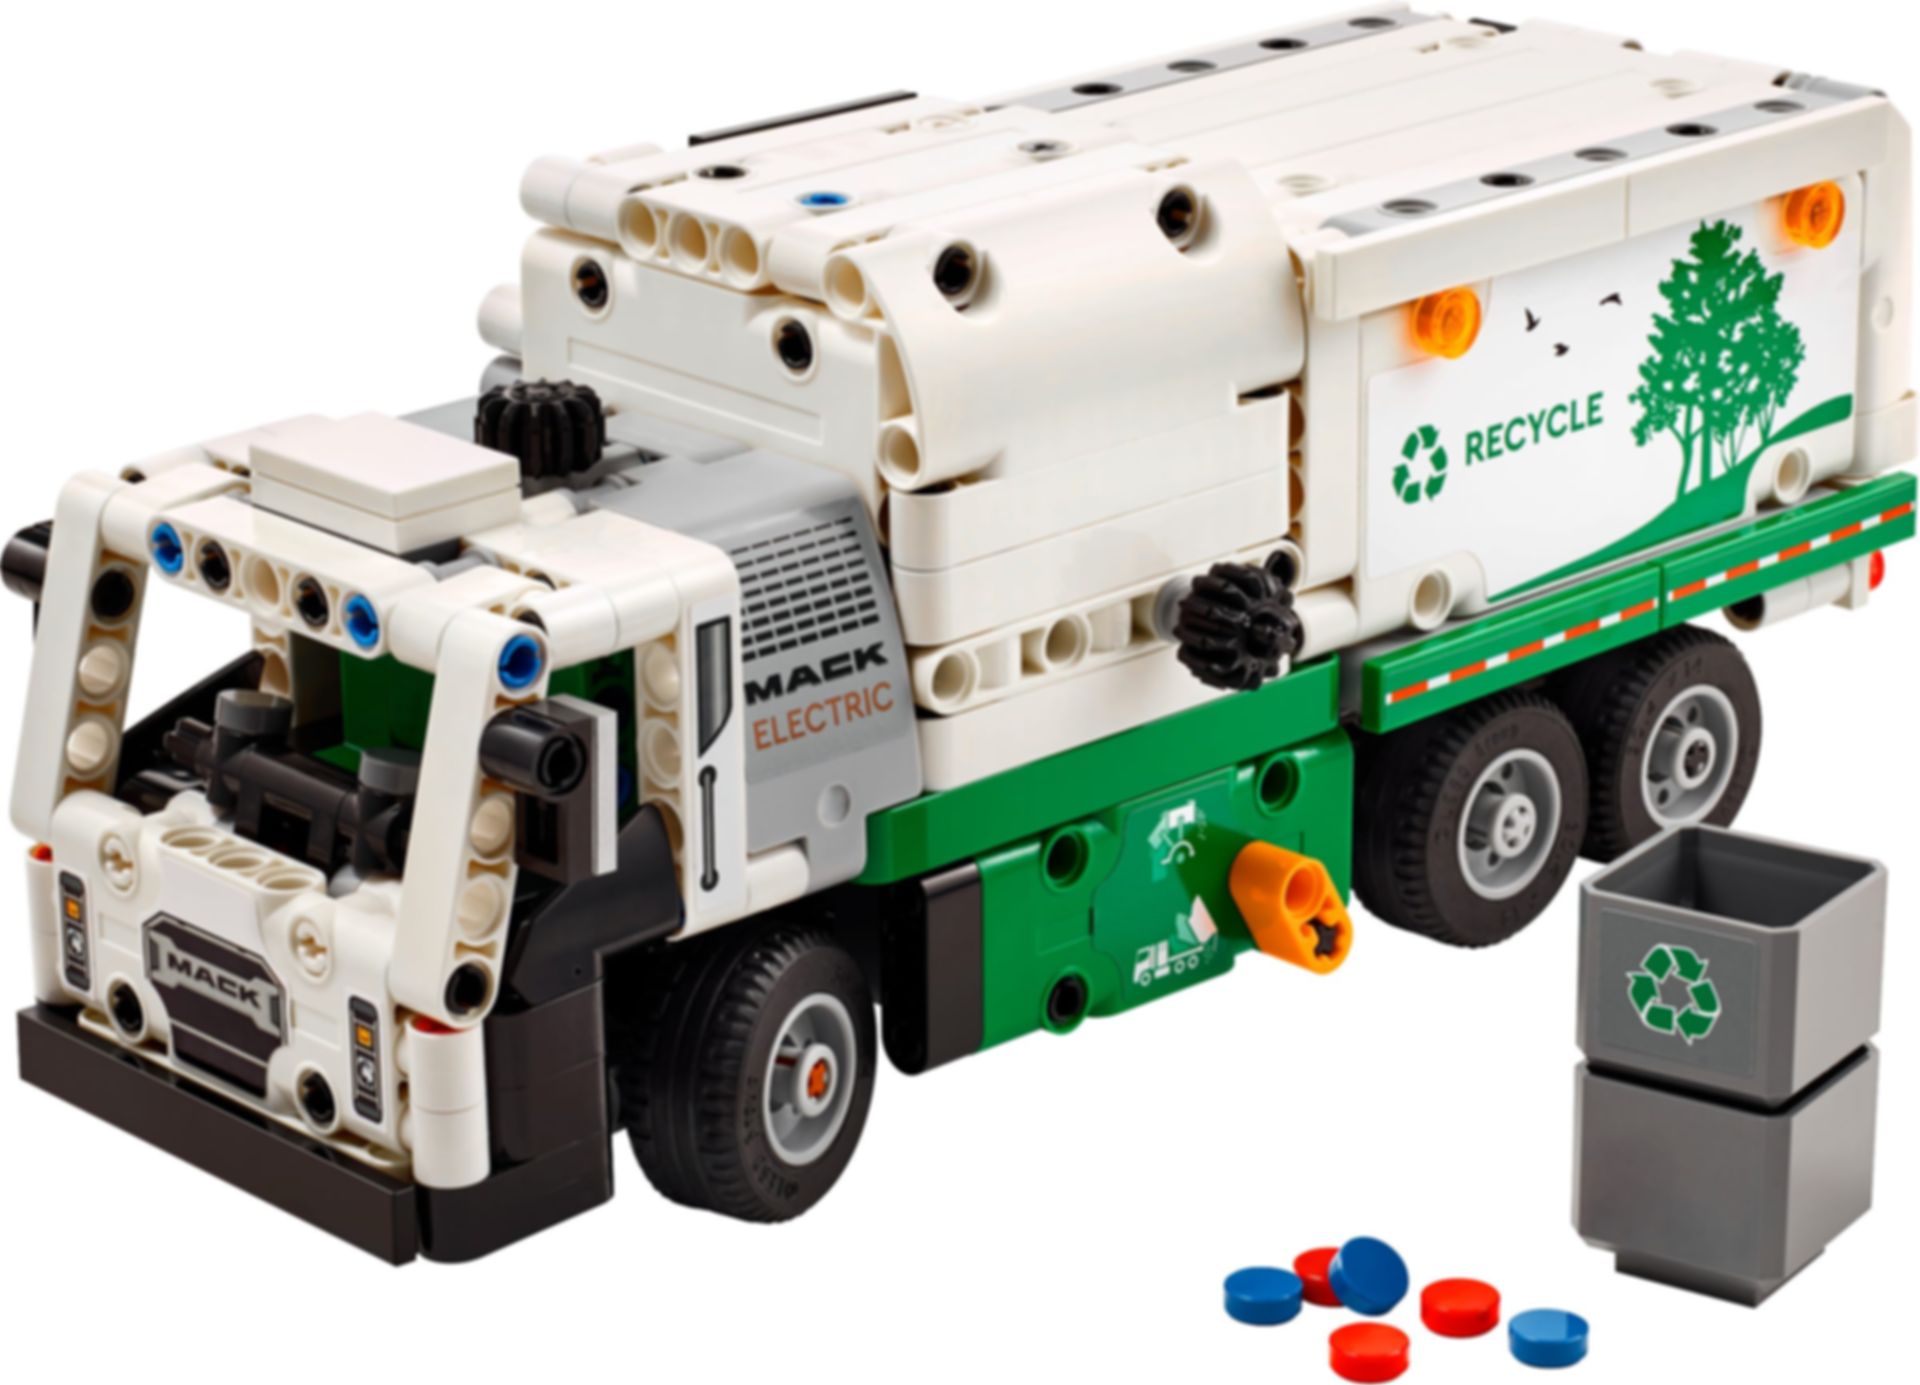 LEGO® Technic Mack® LR Electric Garbage Truck components